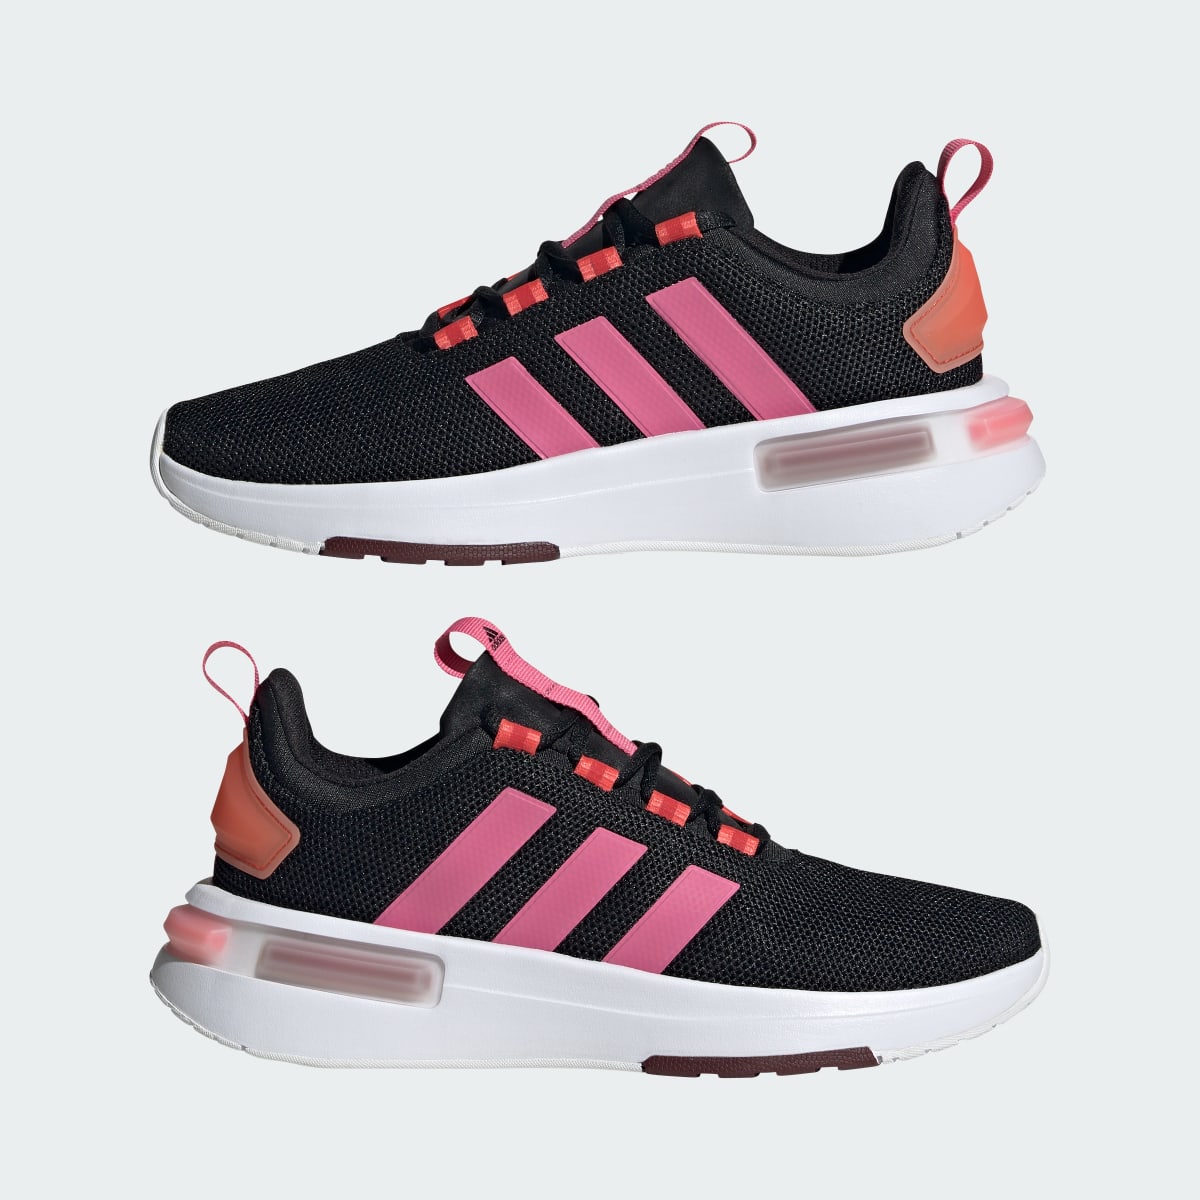 Adidas Chaussure Racer TR23. 8